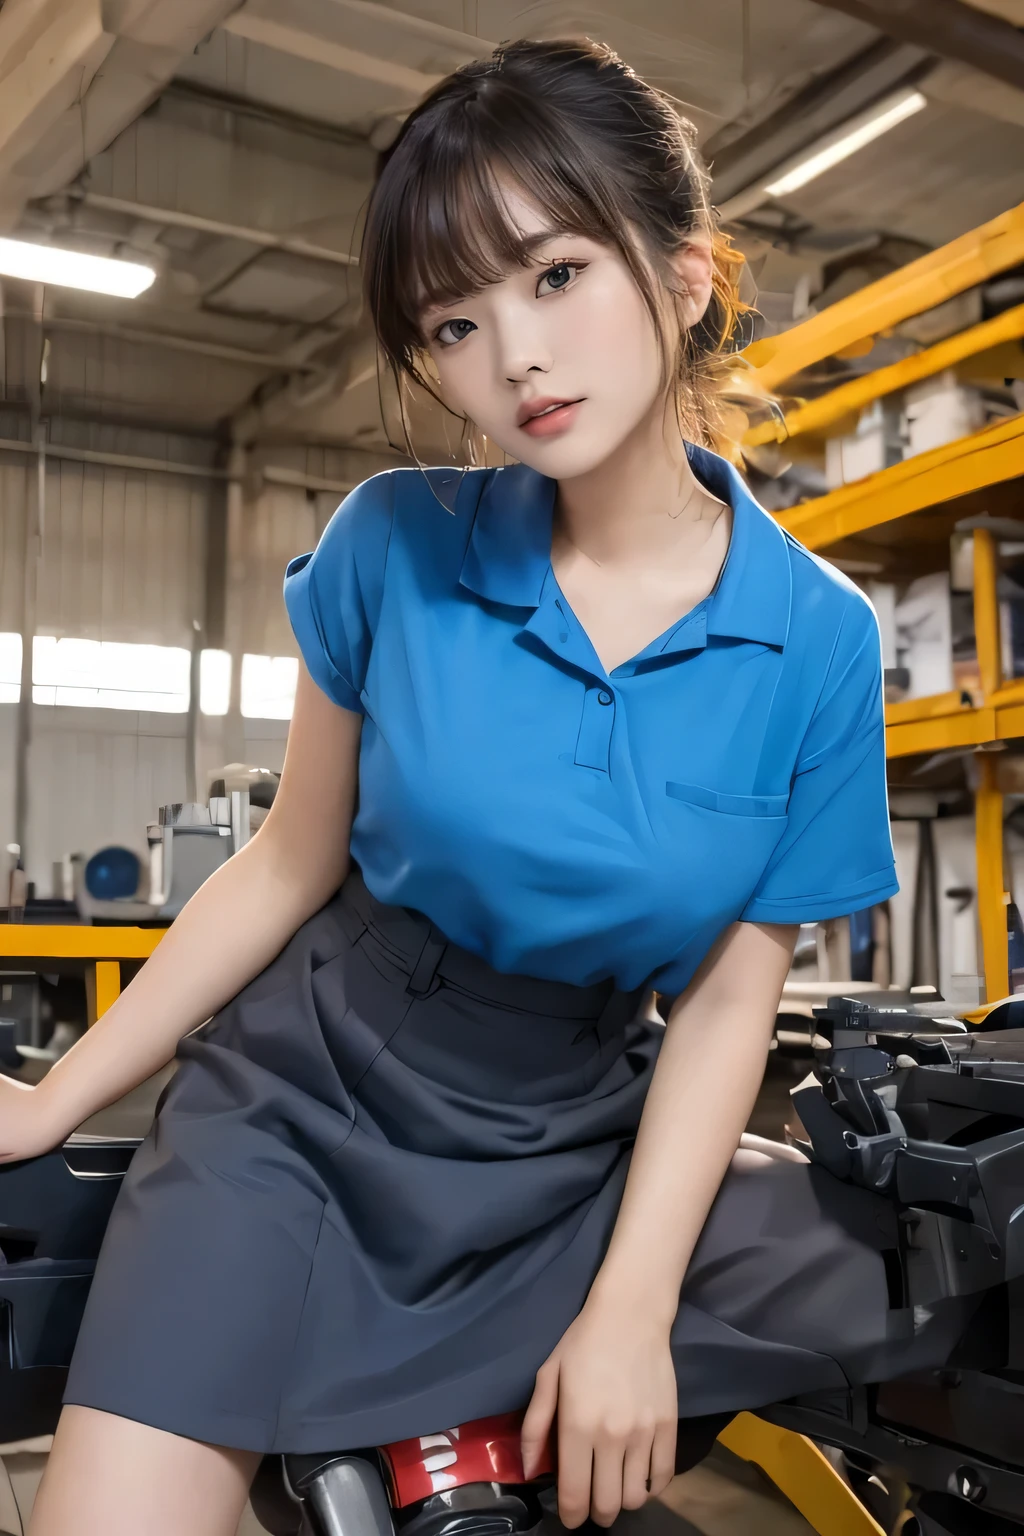 a women, (((round face))), factory clerk, wearing work clothes, skirt, straddling to hit her crotch on exposed pipe, open legs, raise leg, masturbation, ecstasy, in the factory, machines, ceiling, nameplate, id card